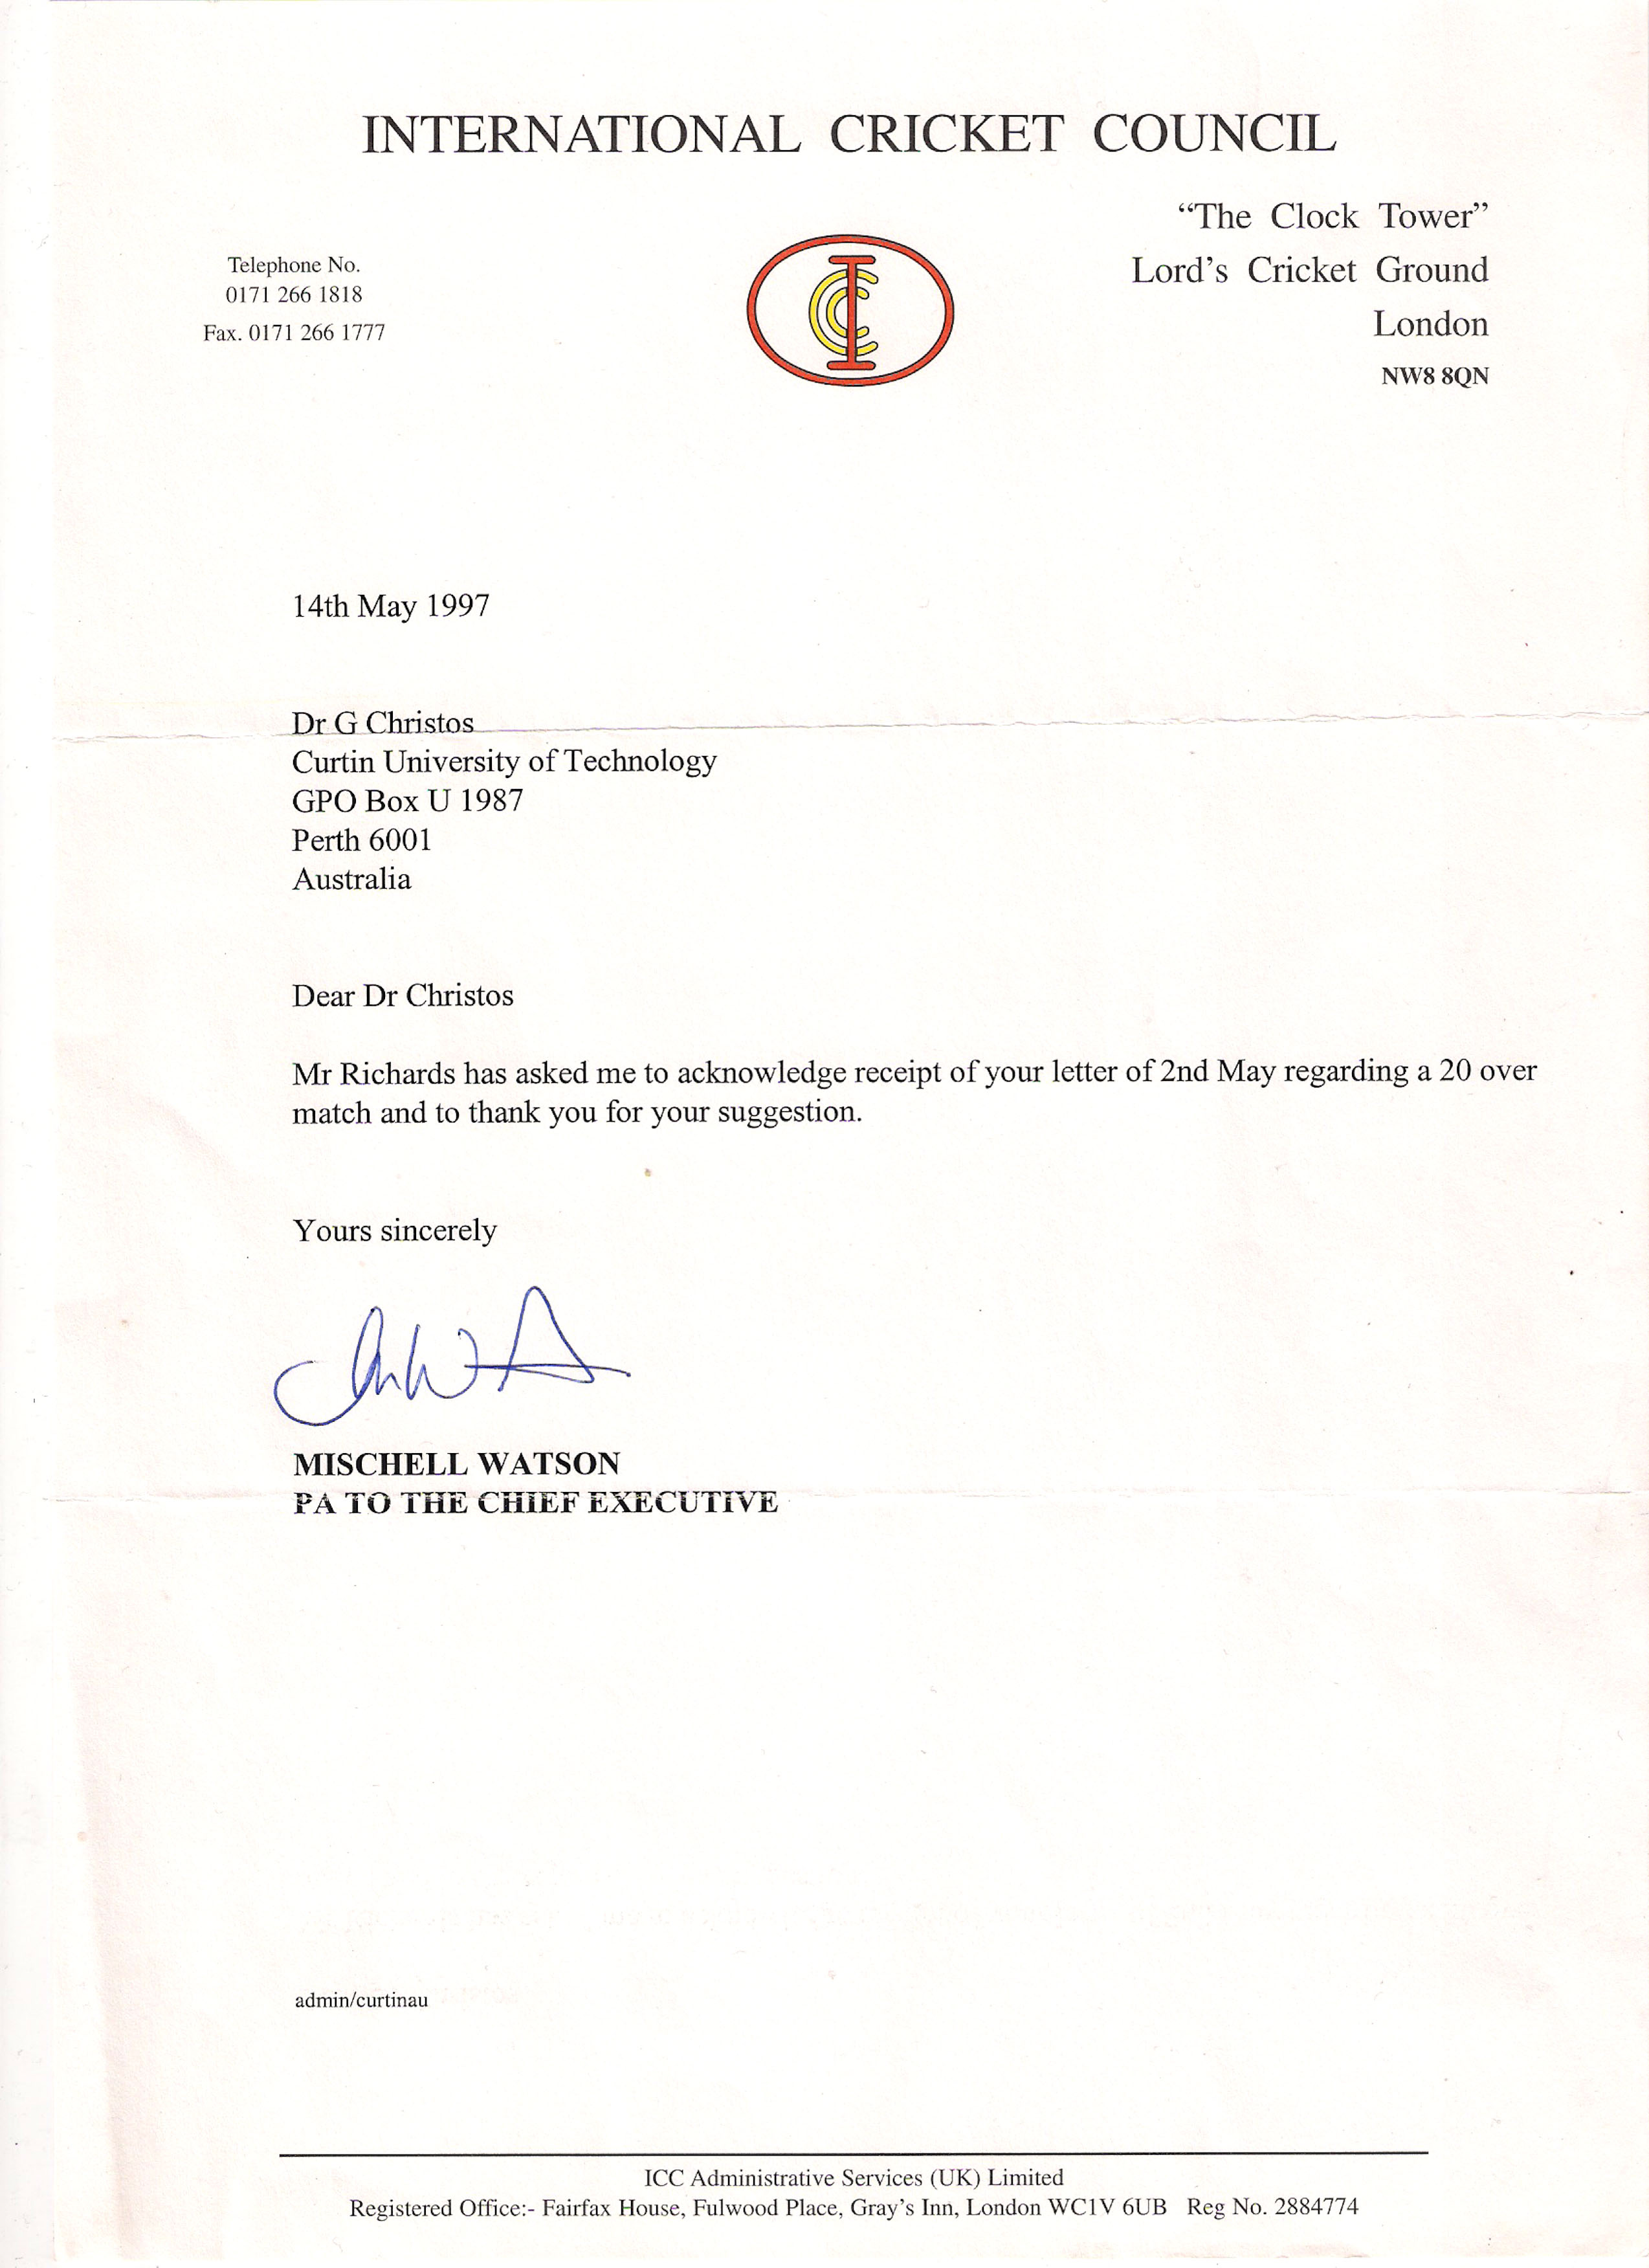 reply from ICC, May 1997